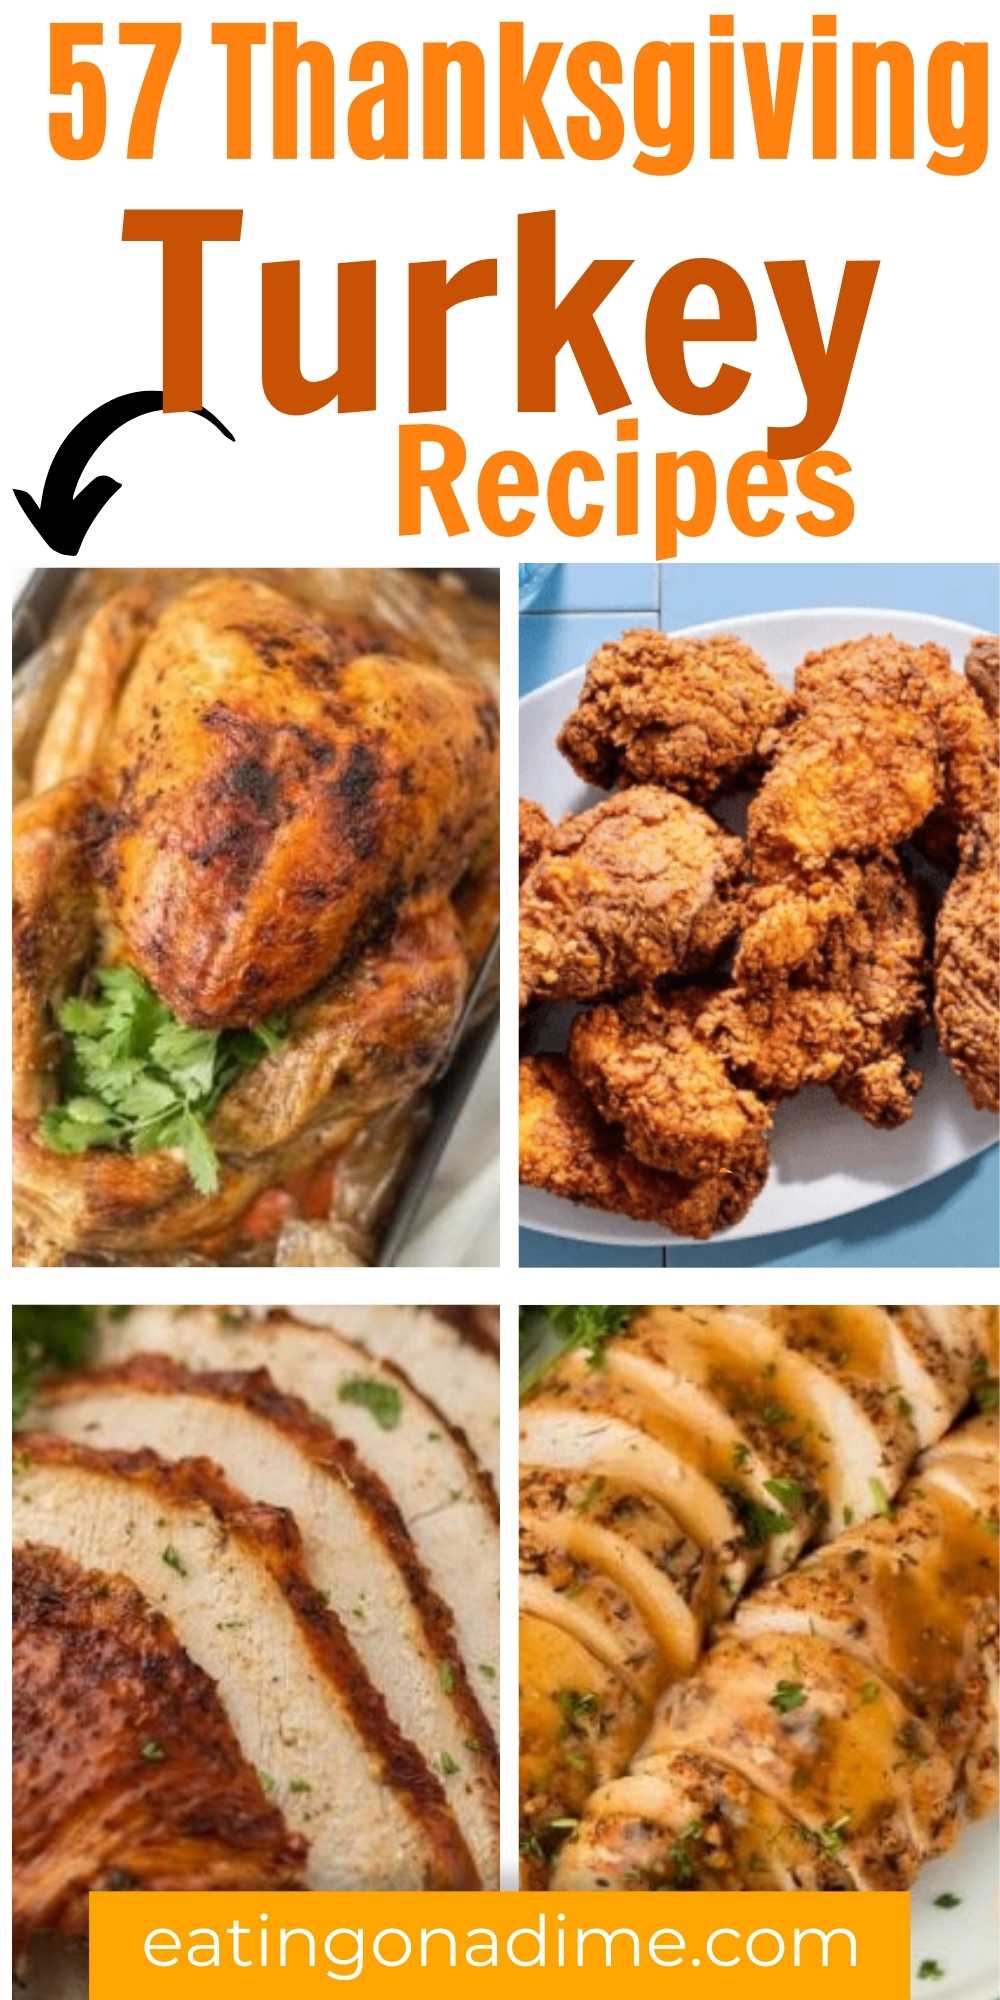 Get ready for the best Thanksgiving turkey recipes. From crispy skin to juicy meat, impress your guests with 57 must-try best turkey recipes for Thanksgiving menus. These easy ideas include recipes for the oven, air fryer, instant pot and more. #eatingonatime #thanksgivingturkeyrecipes #thanksgivingrecipes